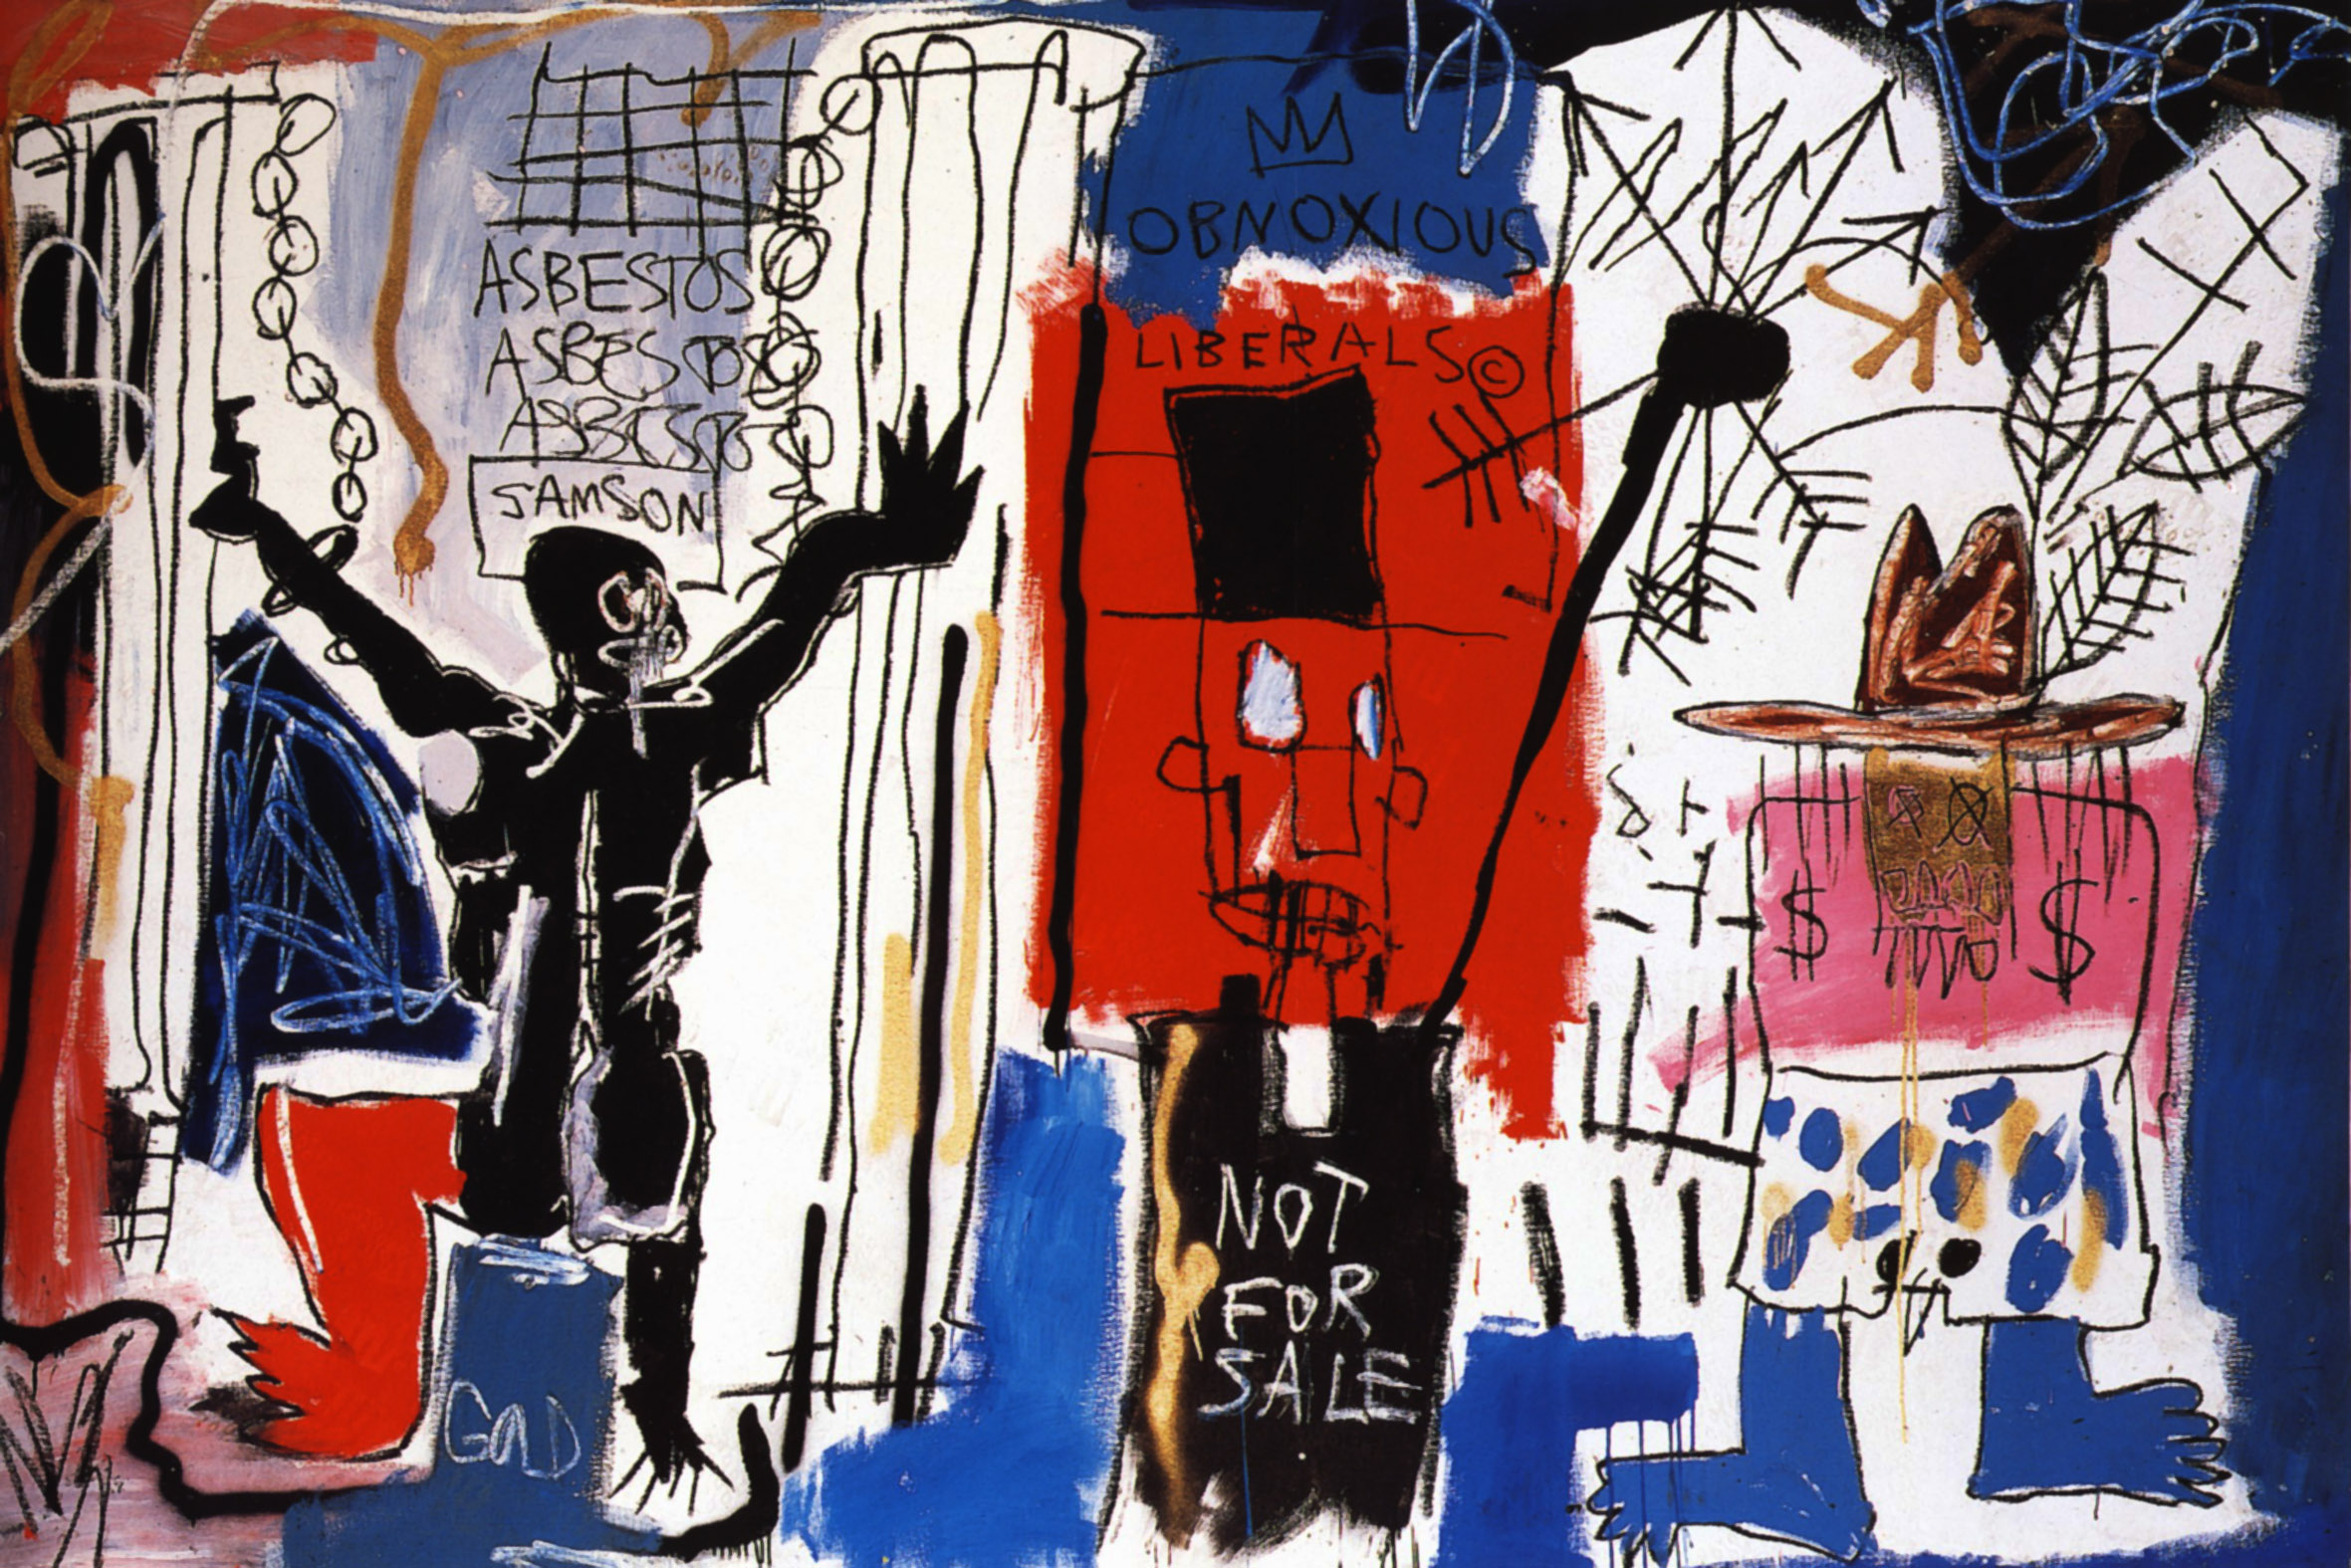 Obnoxious Liberals, Jean-Michel Basquiat, acrylic and crayon on canvas, 1982